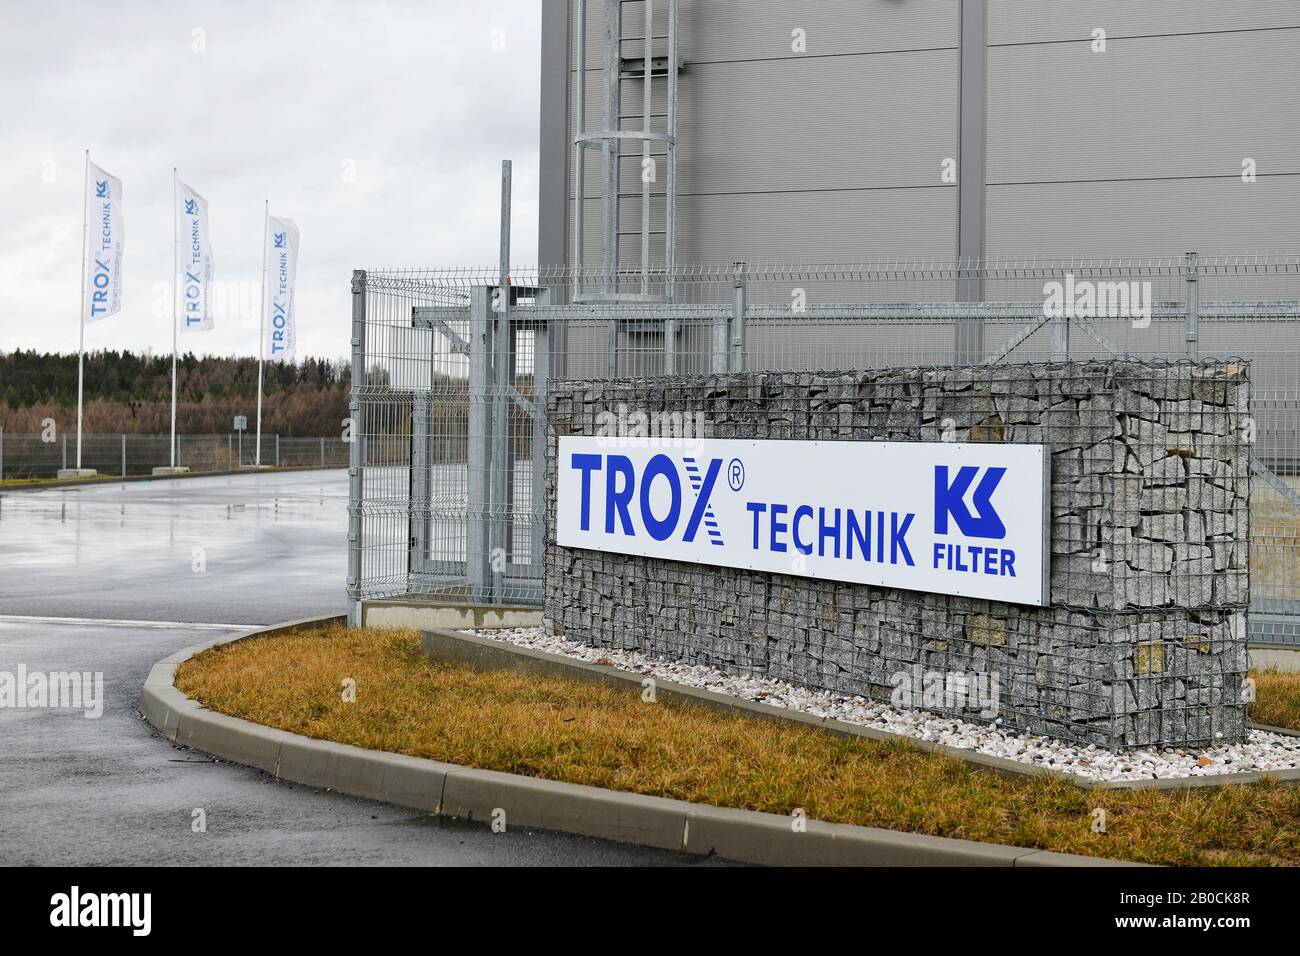 TROX KS Filter, a producer of air conditioning filters, will invest EUR20m  (about Kc500m) in the extension of its Pribram plant, which will help with  growth and production automation, and create 100